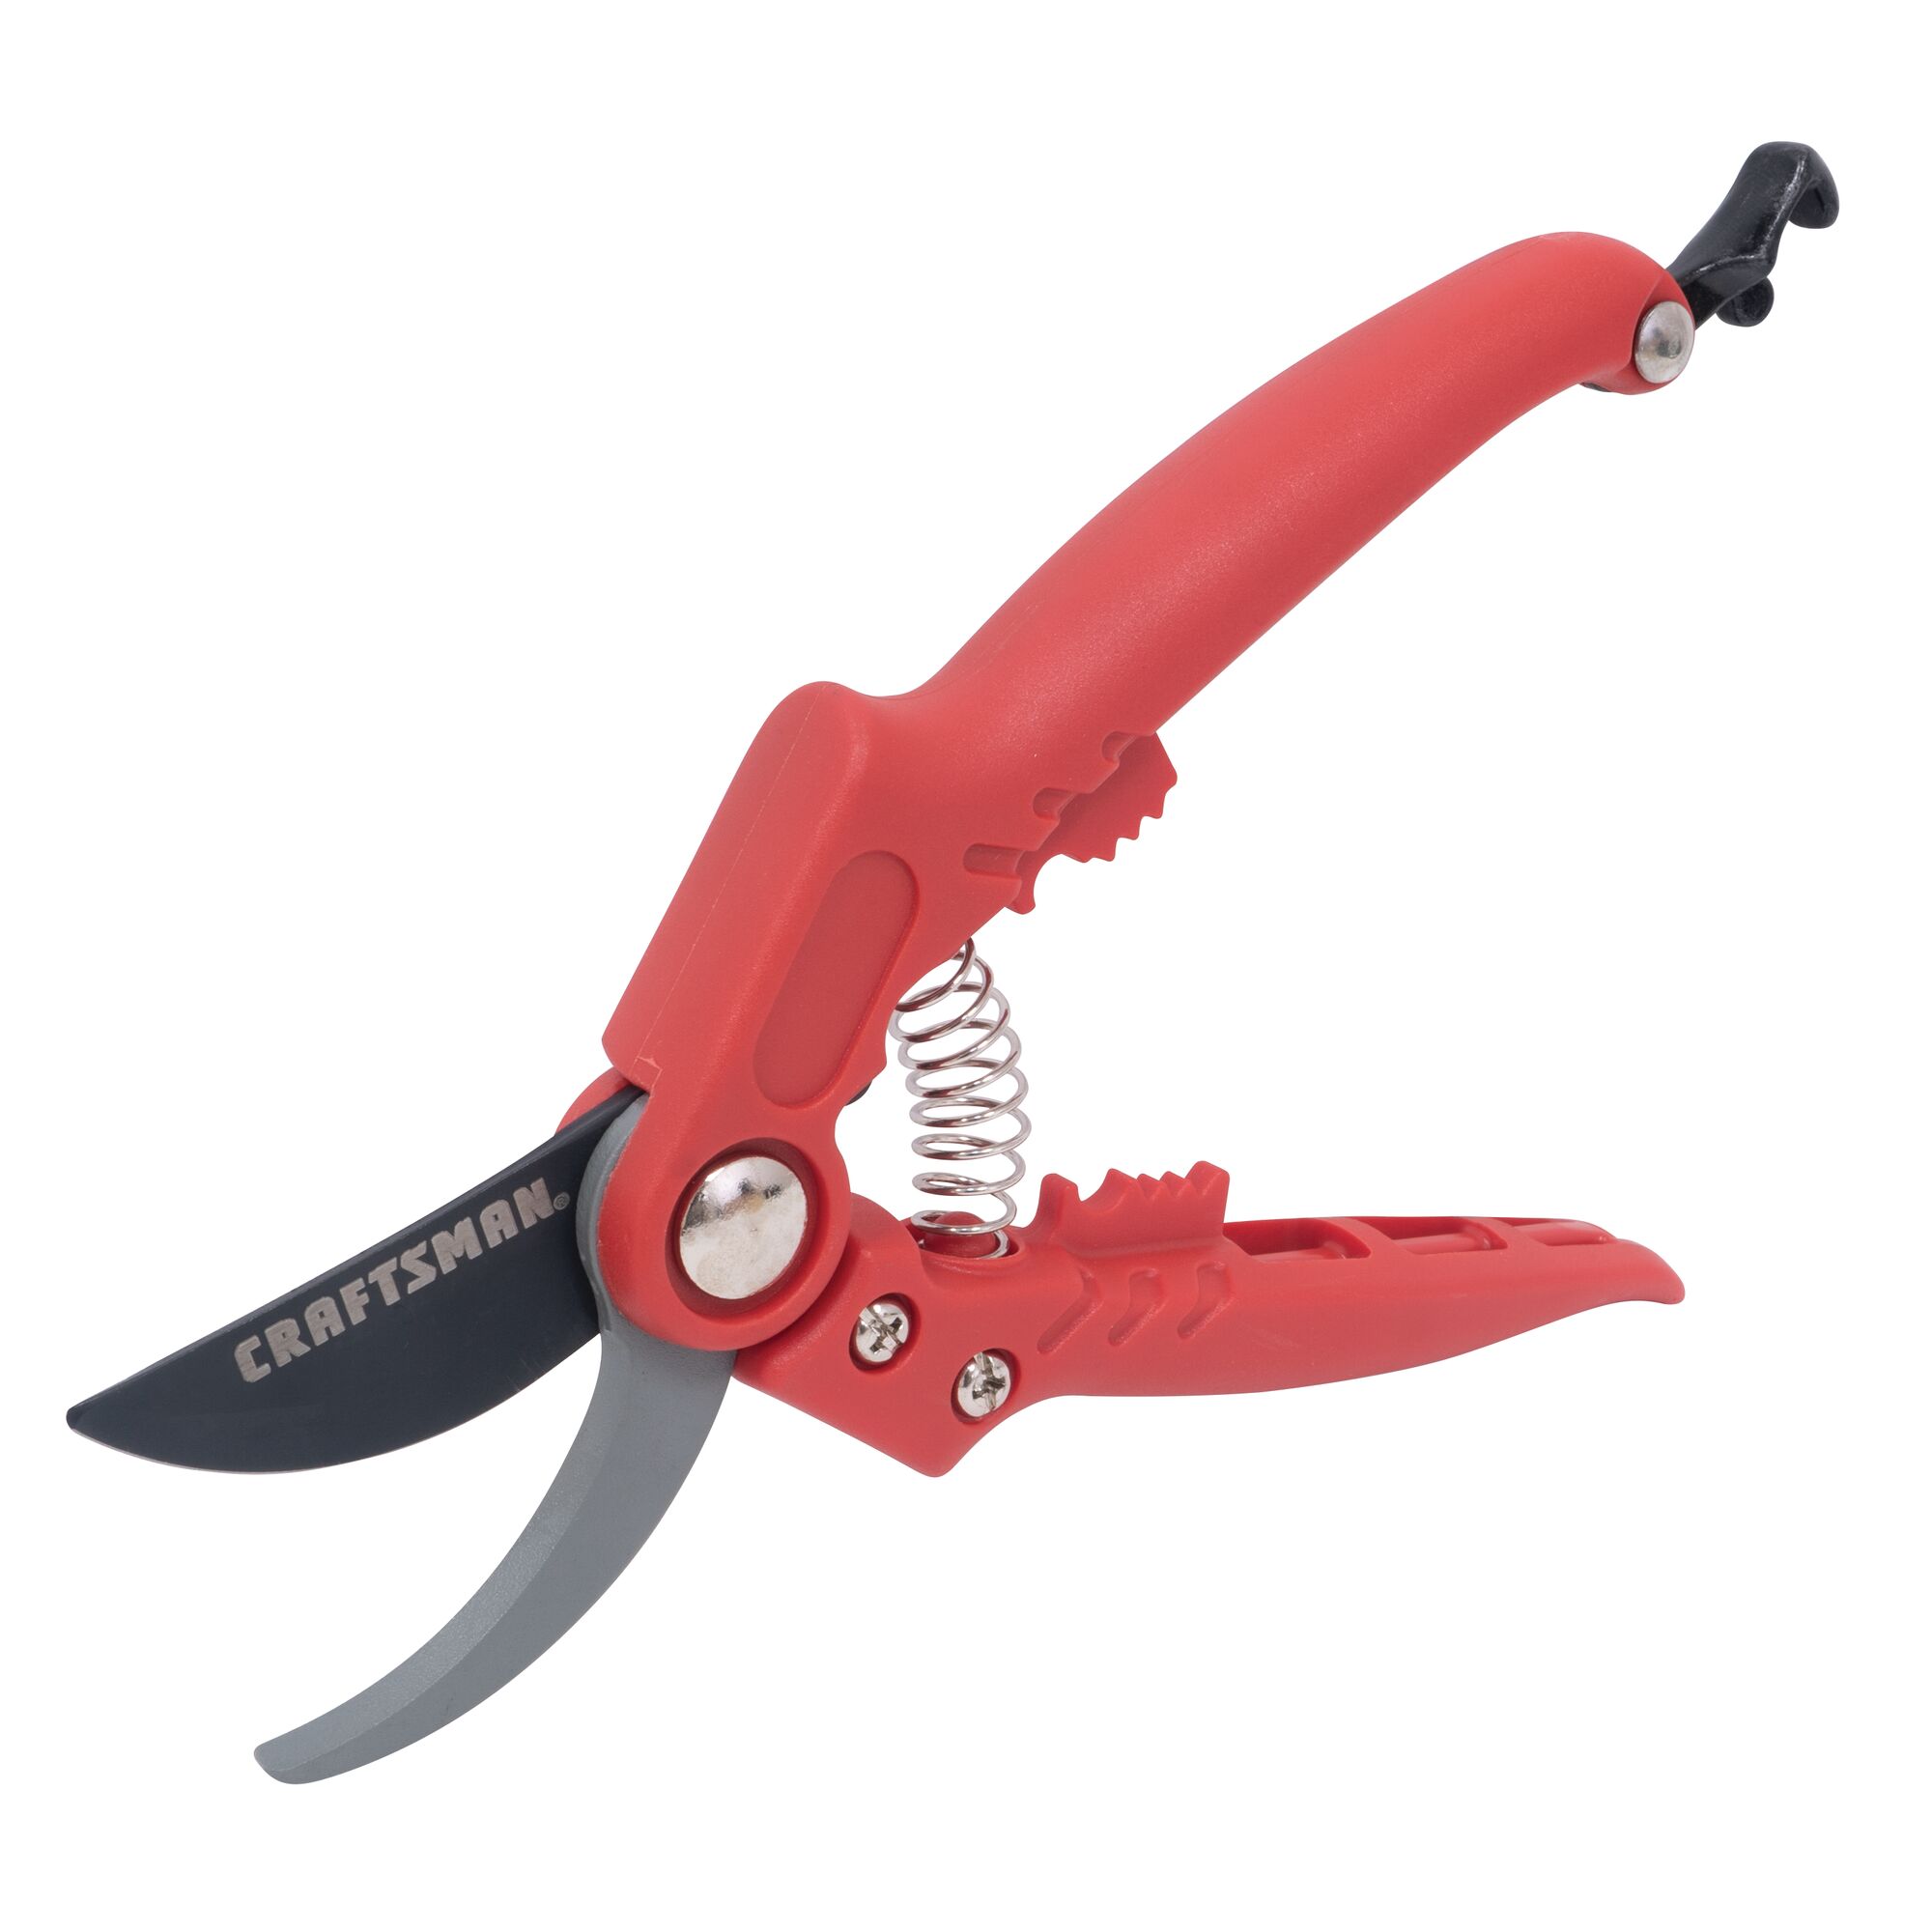 Right profile of 5 eighths inch cut bypass pruner.